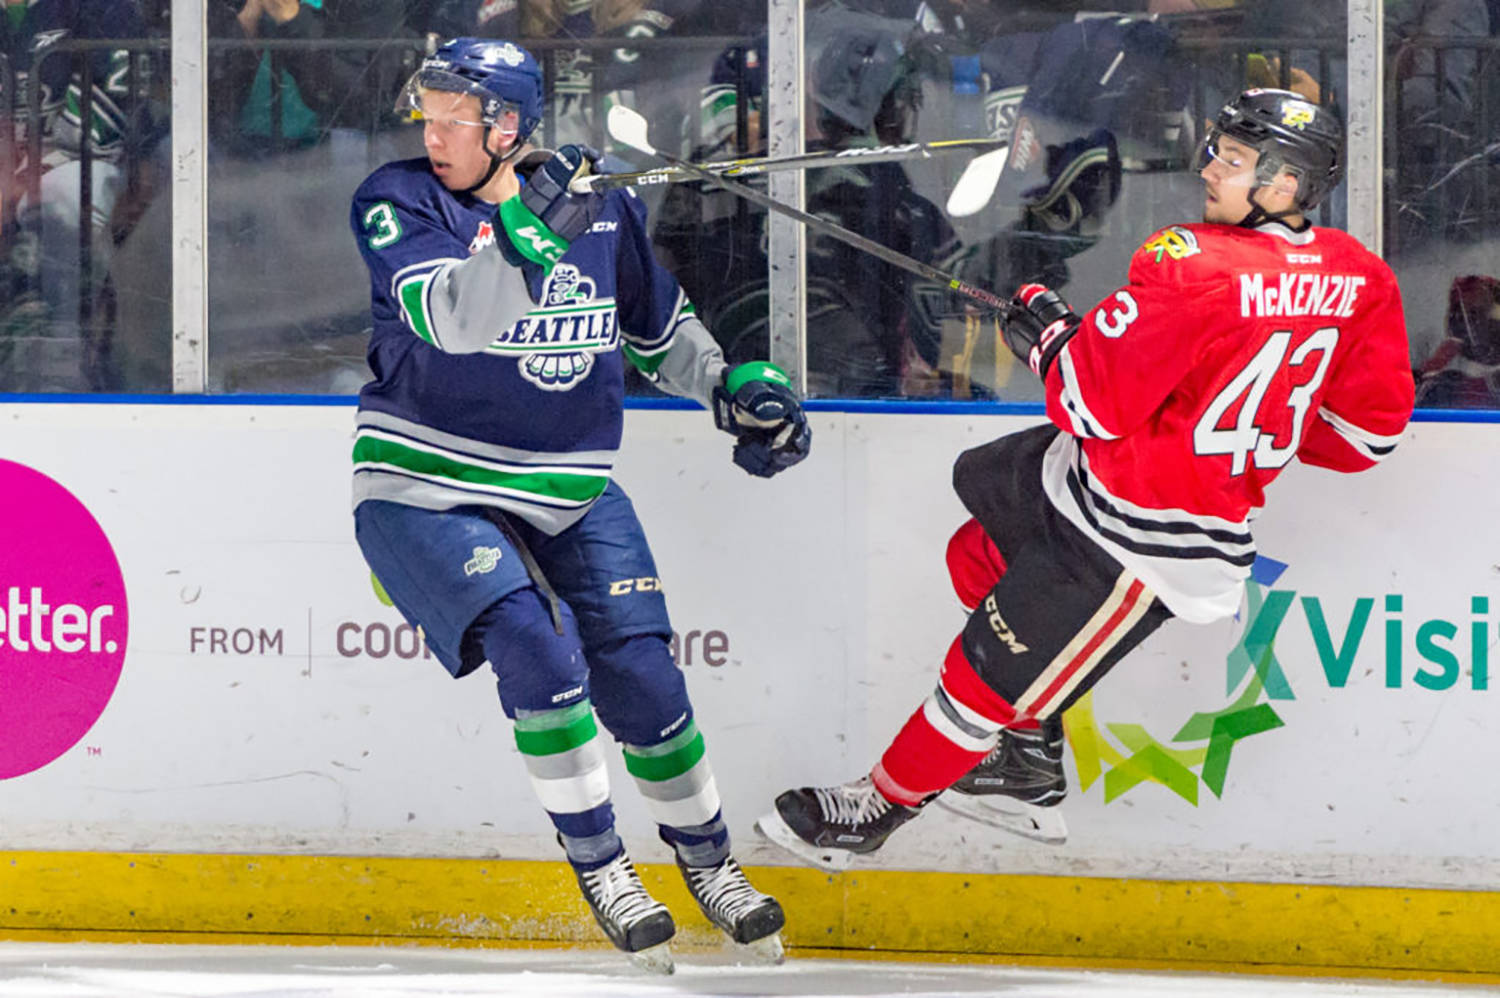 Thunderbirds rookie Cade McNelly, left, and the Winterhawks’ Skyler McKenzie collide along the boards during WHL play Saturday night at the accesso ShoWare Center. COURTESY PHOTO, Brian Liesse, T-Birds